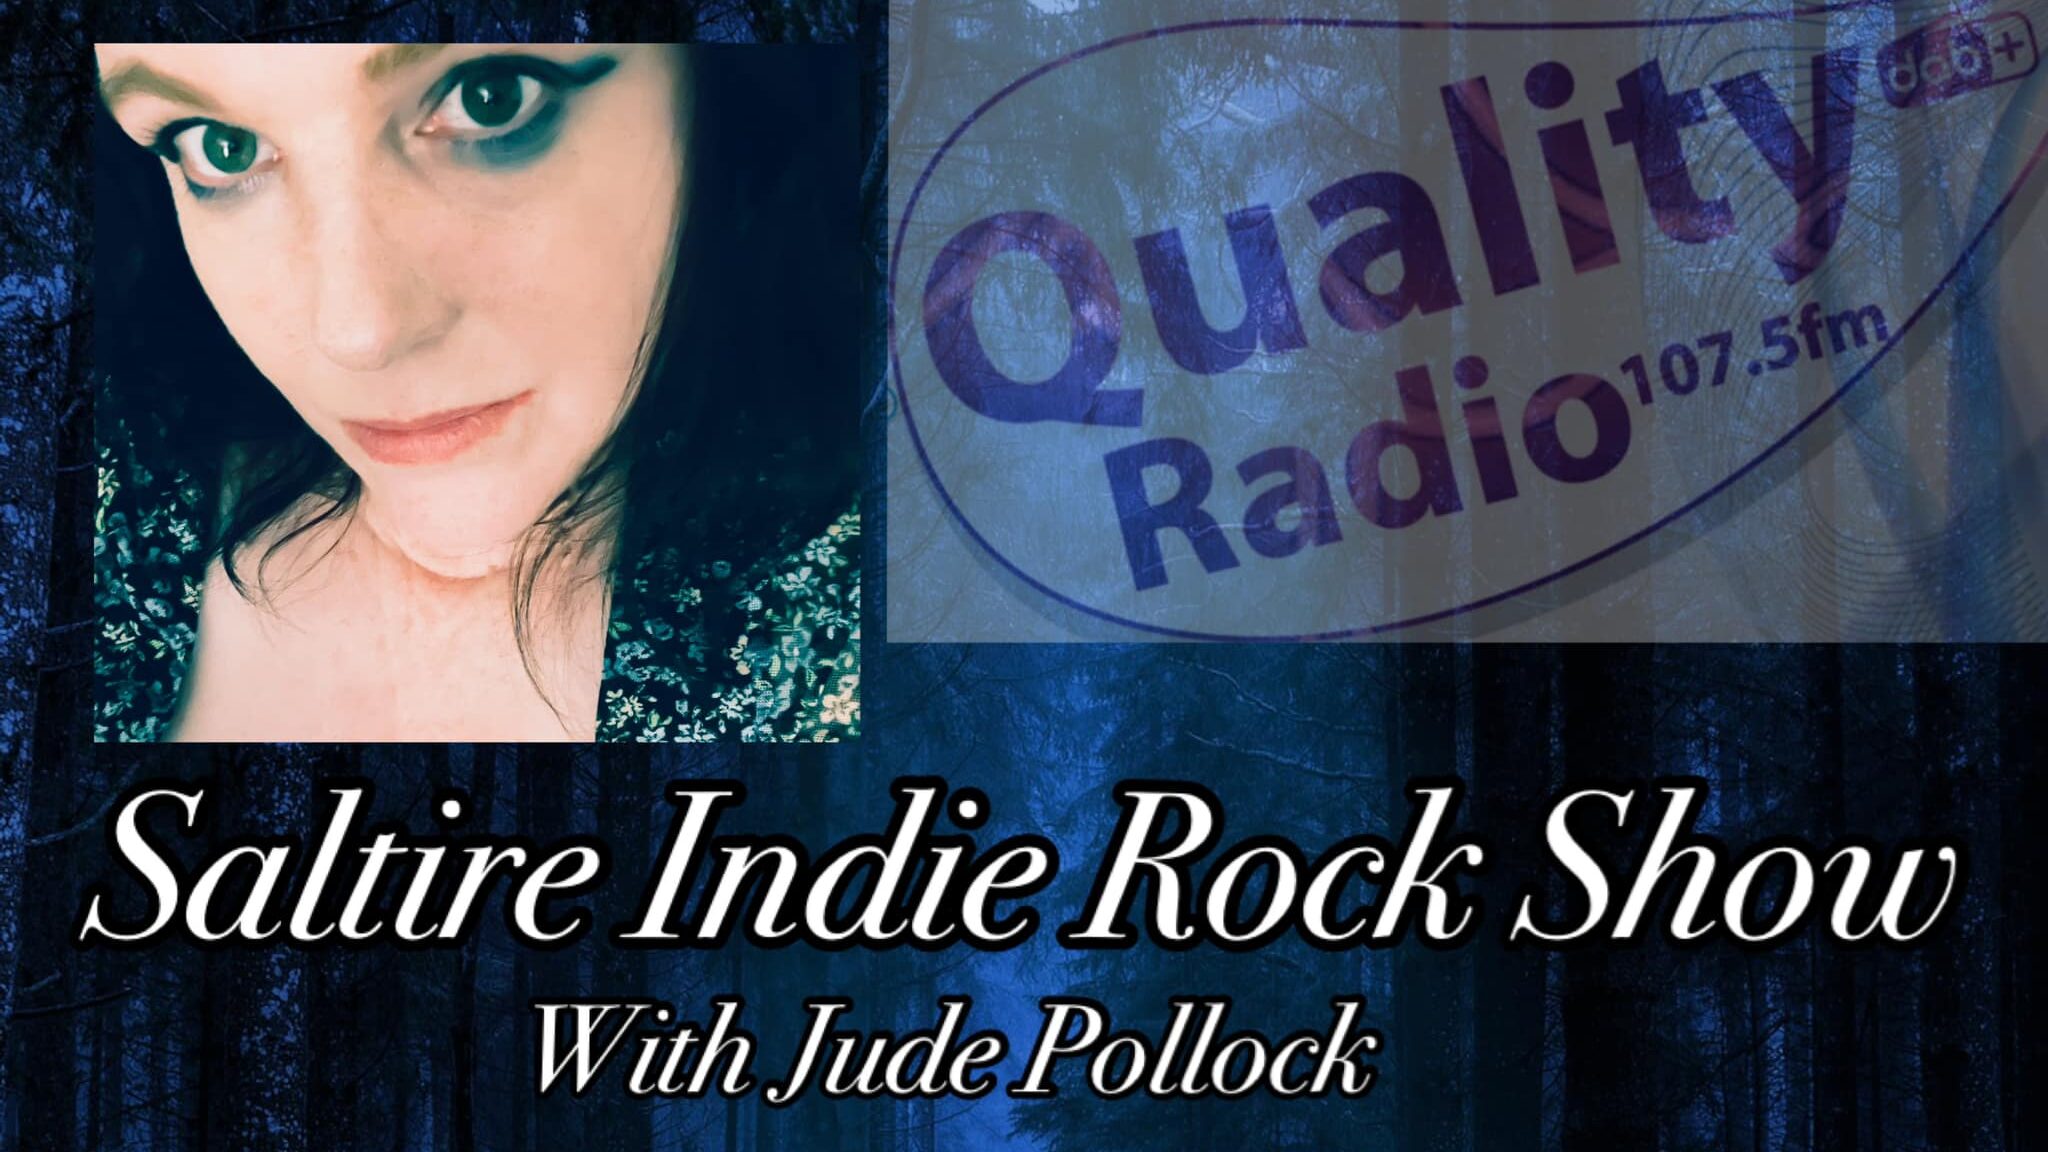 Saltire Indie Rock Show with Jude Pollock on Quality Radio